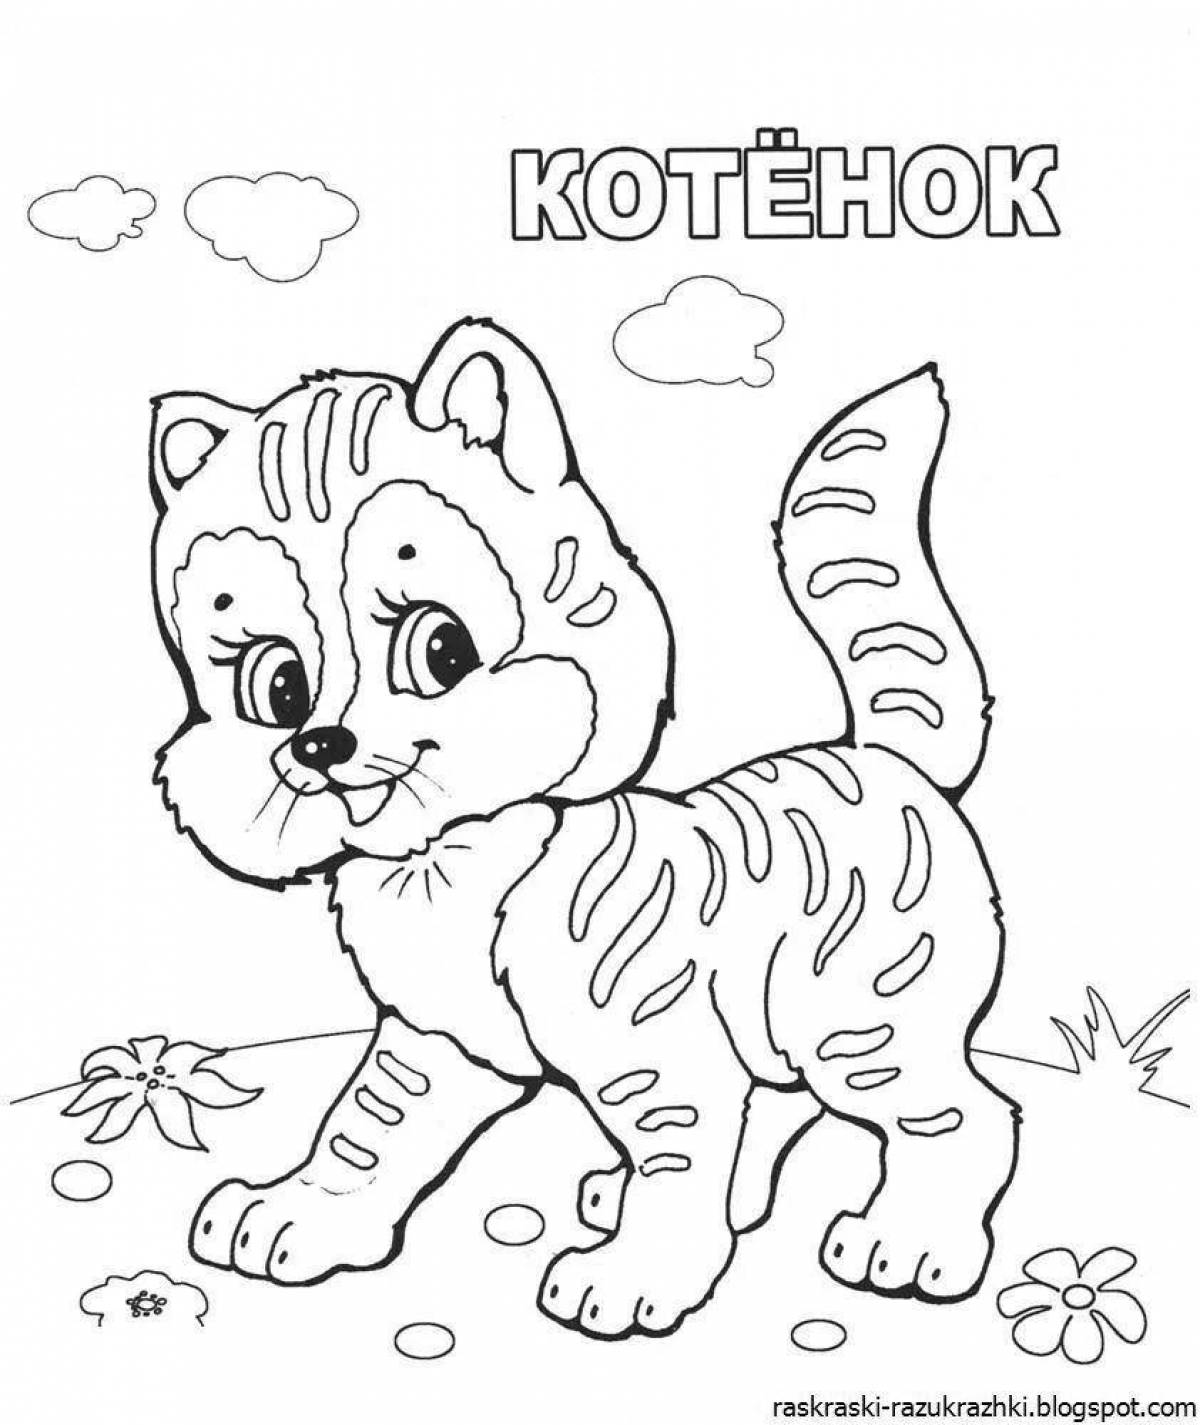 Crazy animal coloring pages for 6-7 year olds